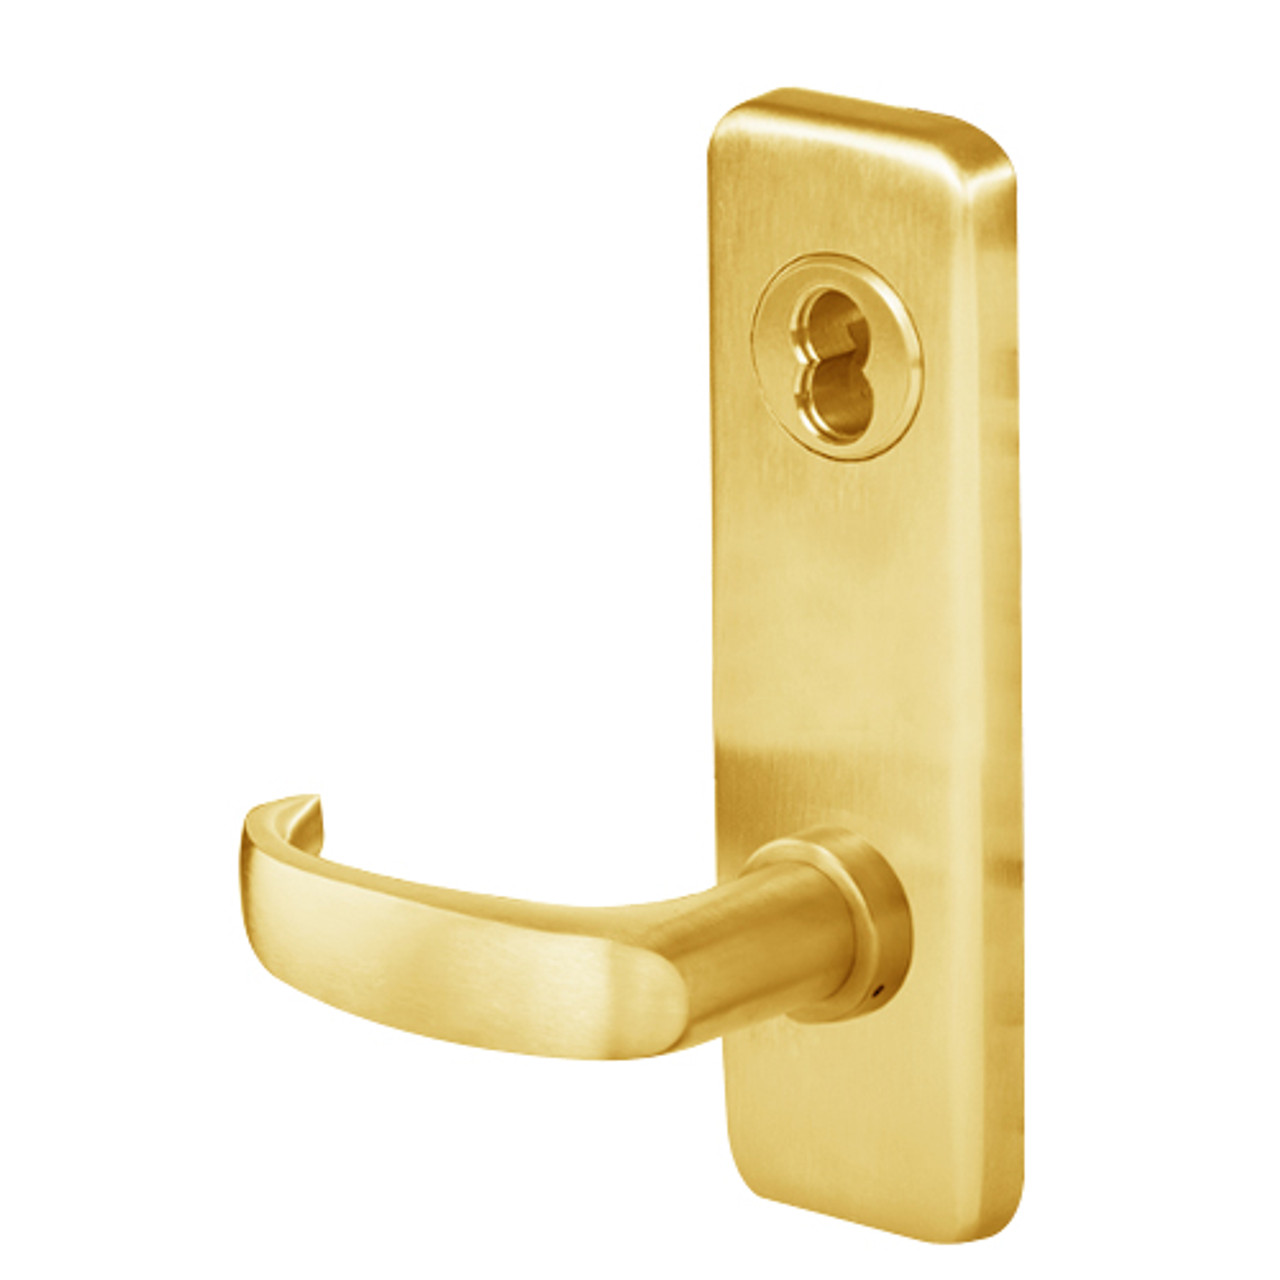 45H7G14J605 Best 40H Series Communicating with Deadbolt Heavy Duty Mortise Lever Lock with Curved with Return Style in Bright Brass